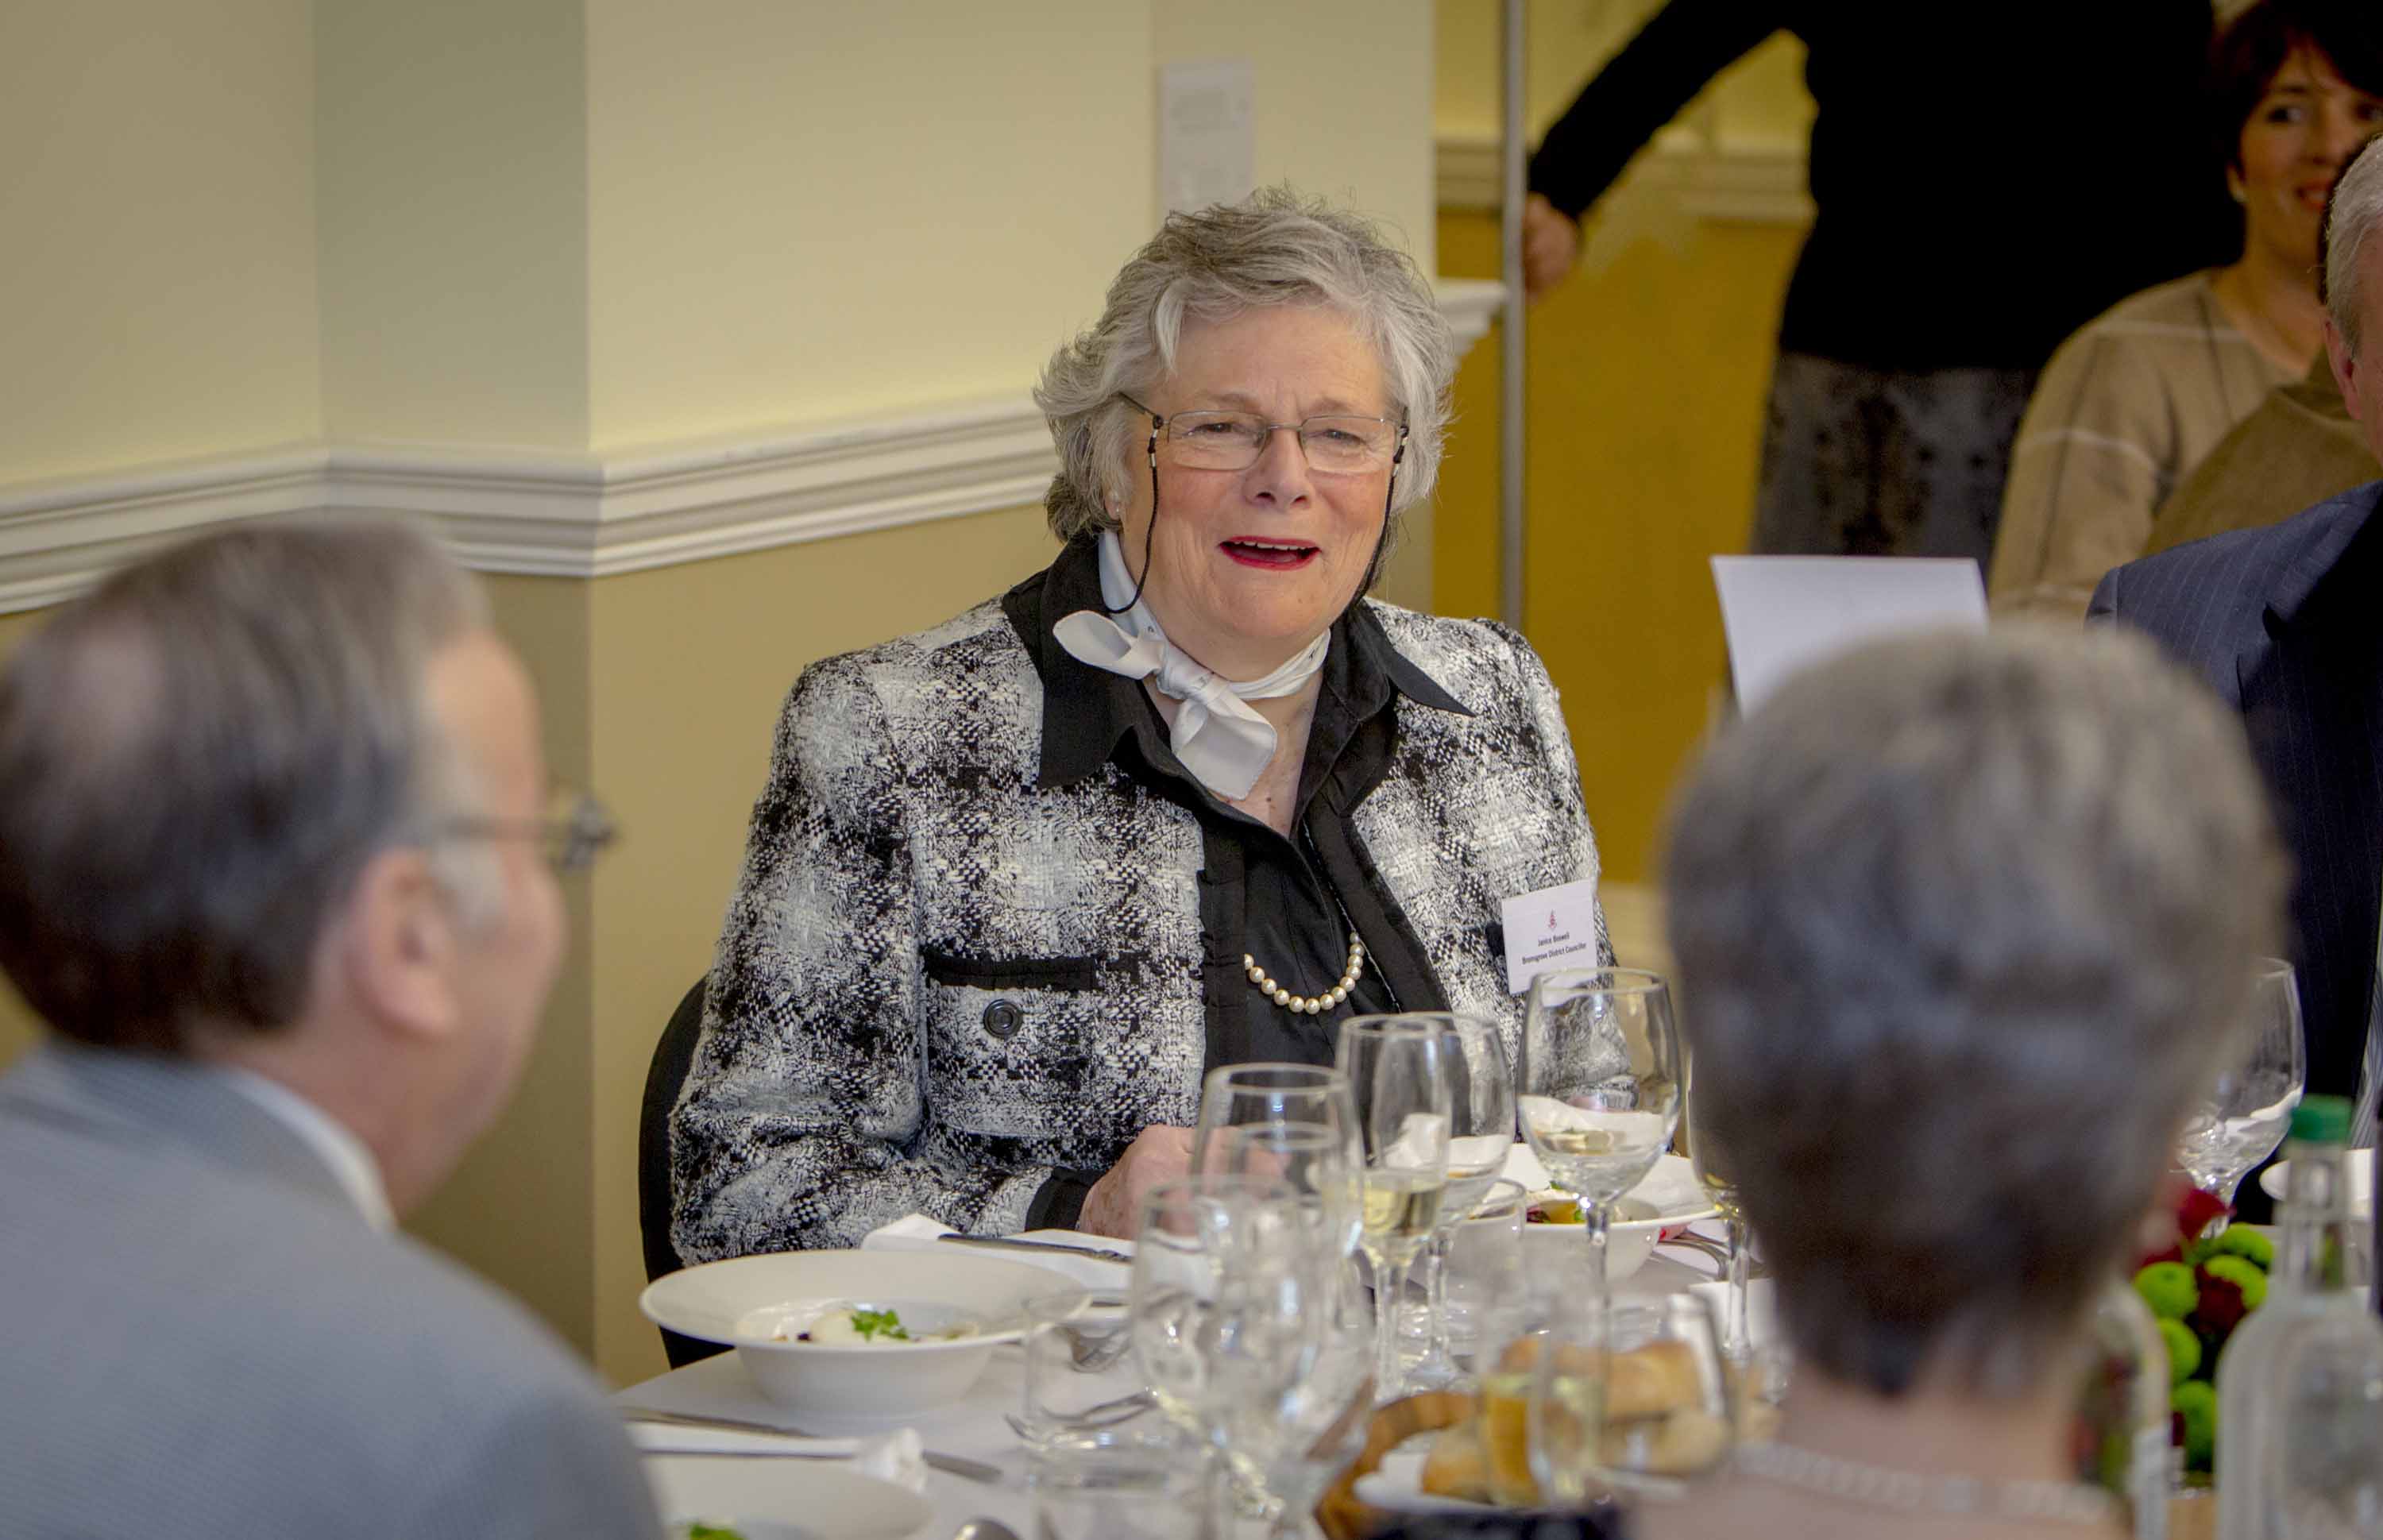 Bromsgrove District Councillor, Janice Boswell - Housman Hall Official Re-Opening, 29th November 2014